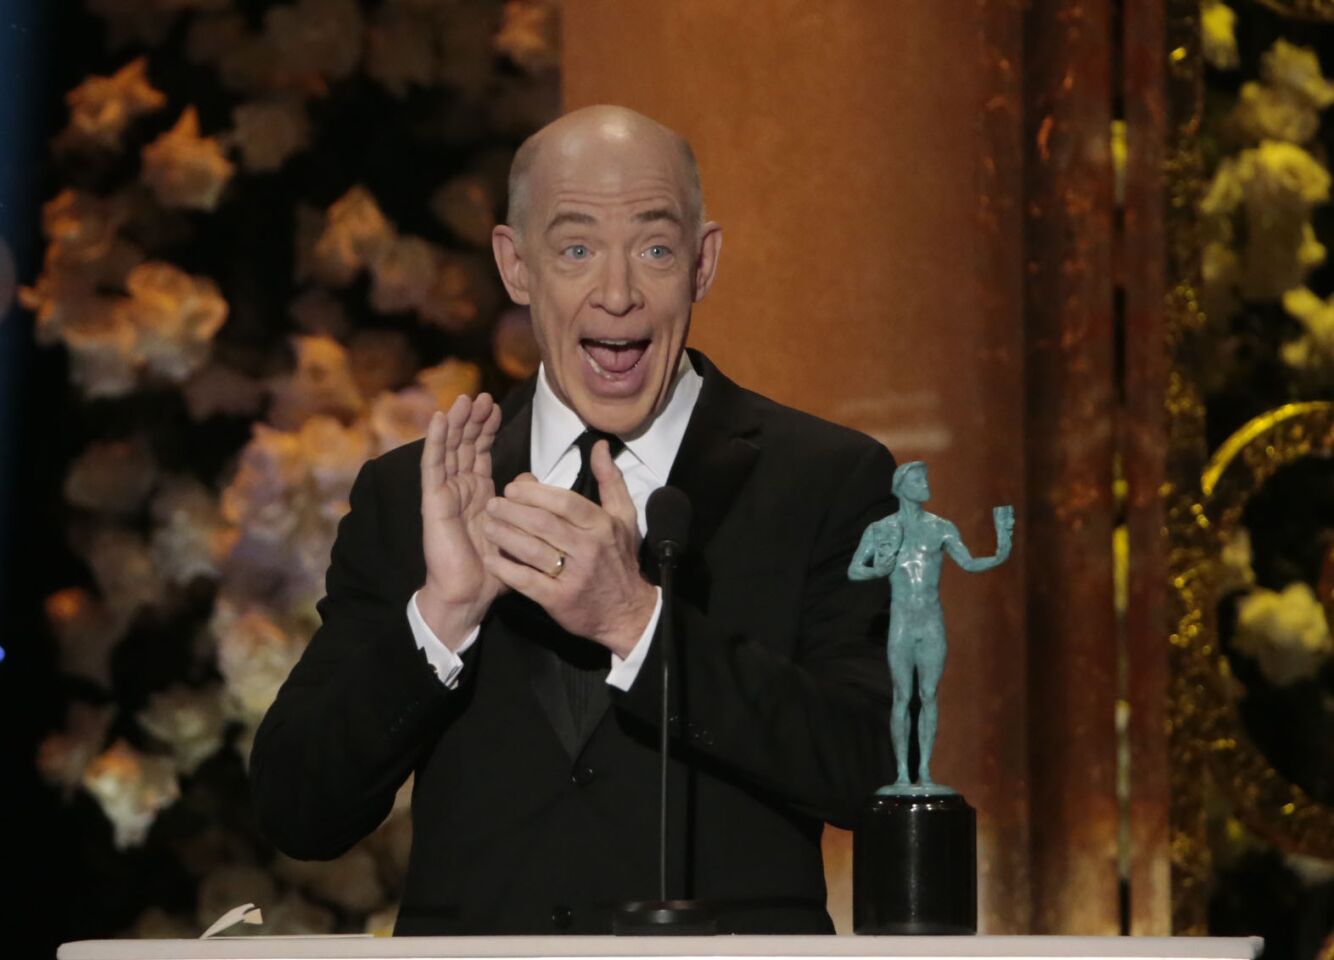 Quotes from the stars | J.K. Simmons, 'Whiplash'